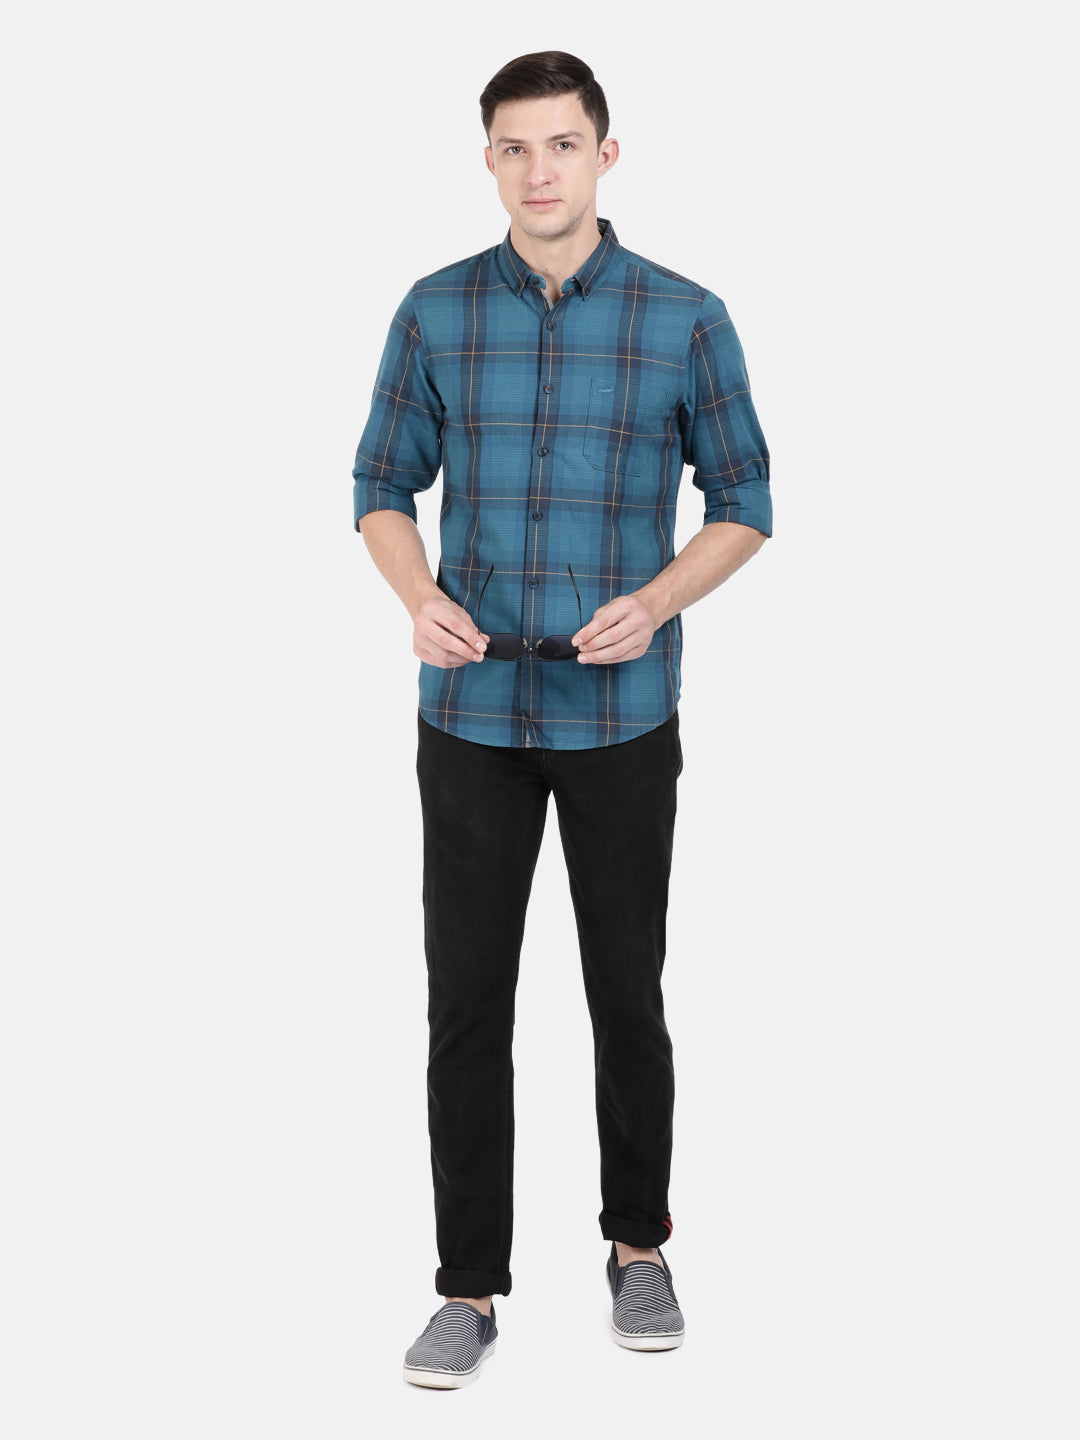 Crocodile Casual Full Sleeve Slim Fit Checks Teal with Collar Shirt for Men